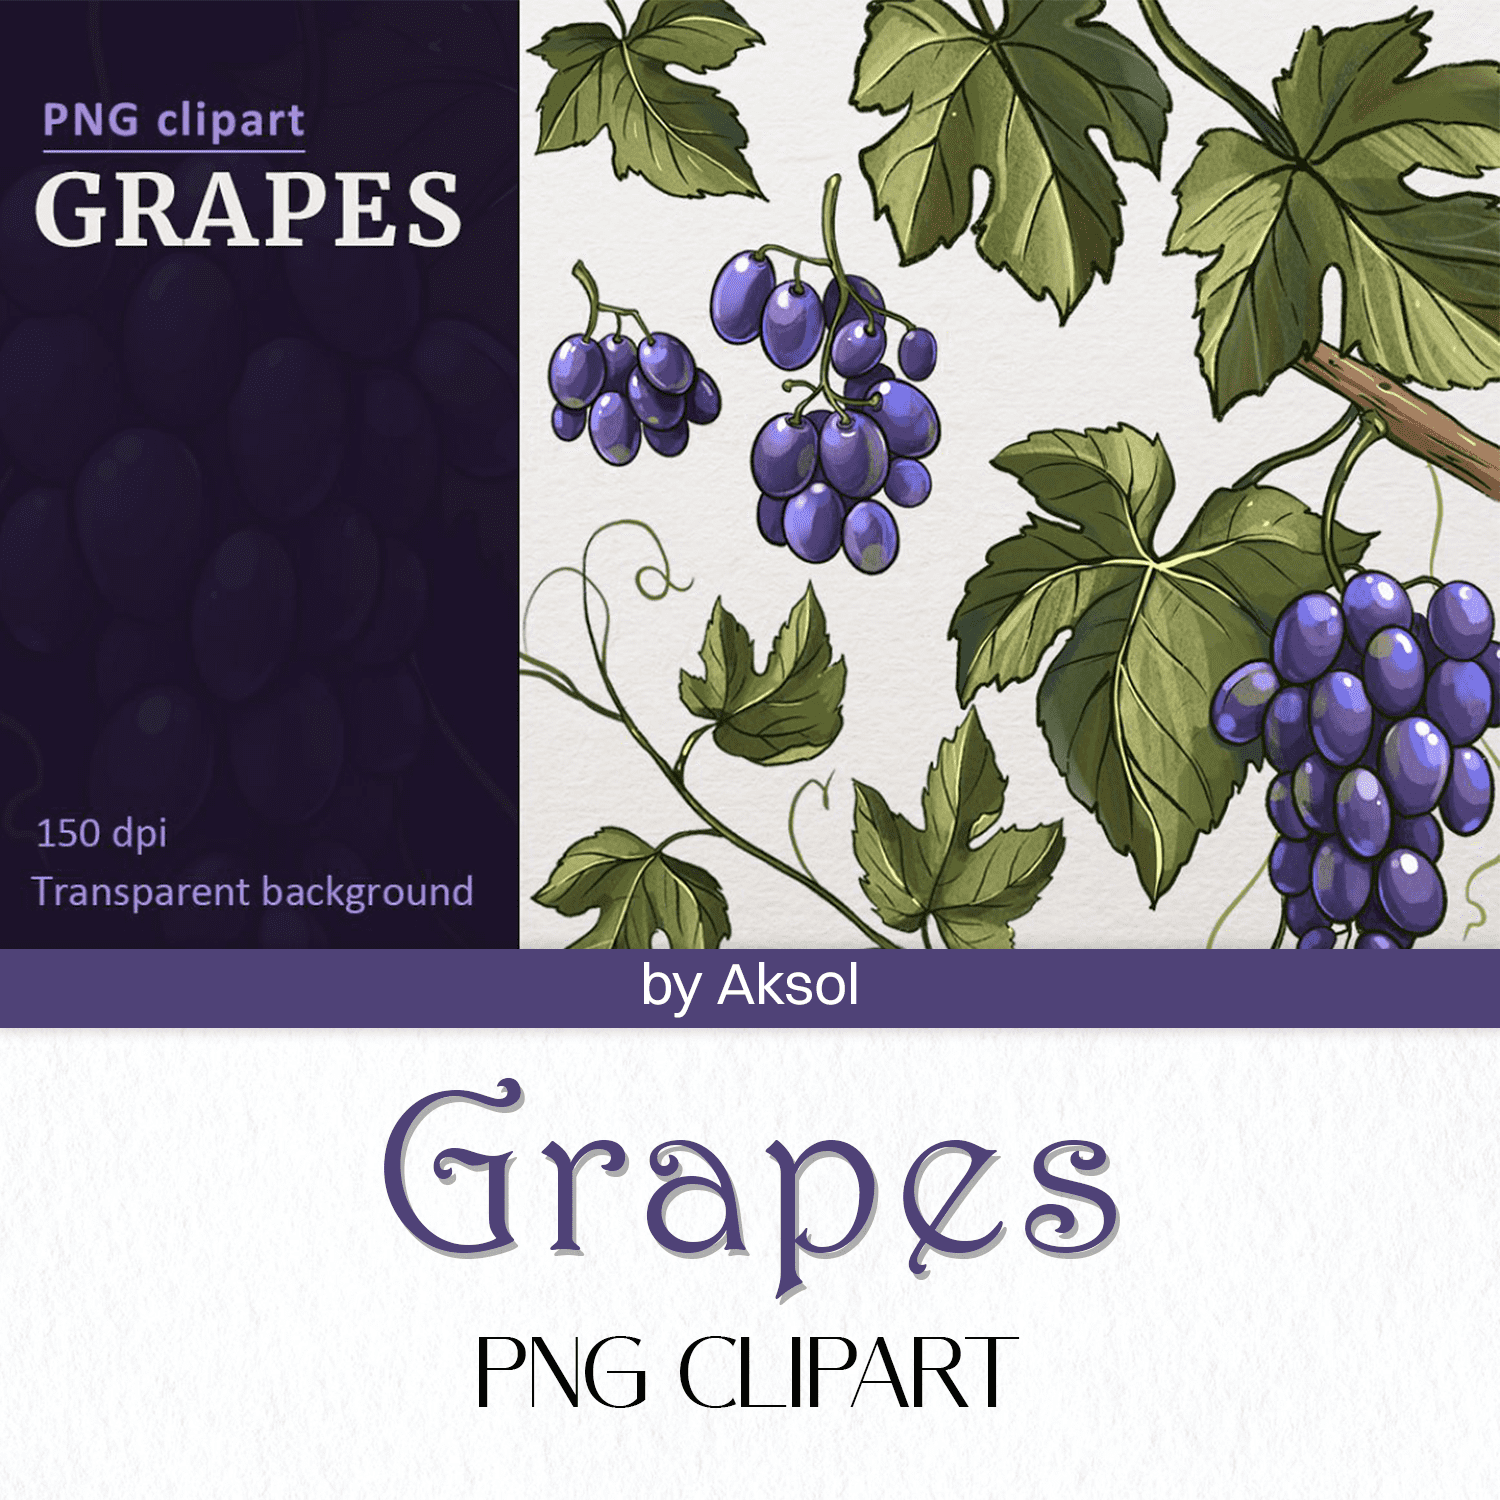 Grapes. PNG clipart created by Aksol.